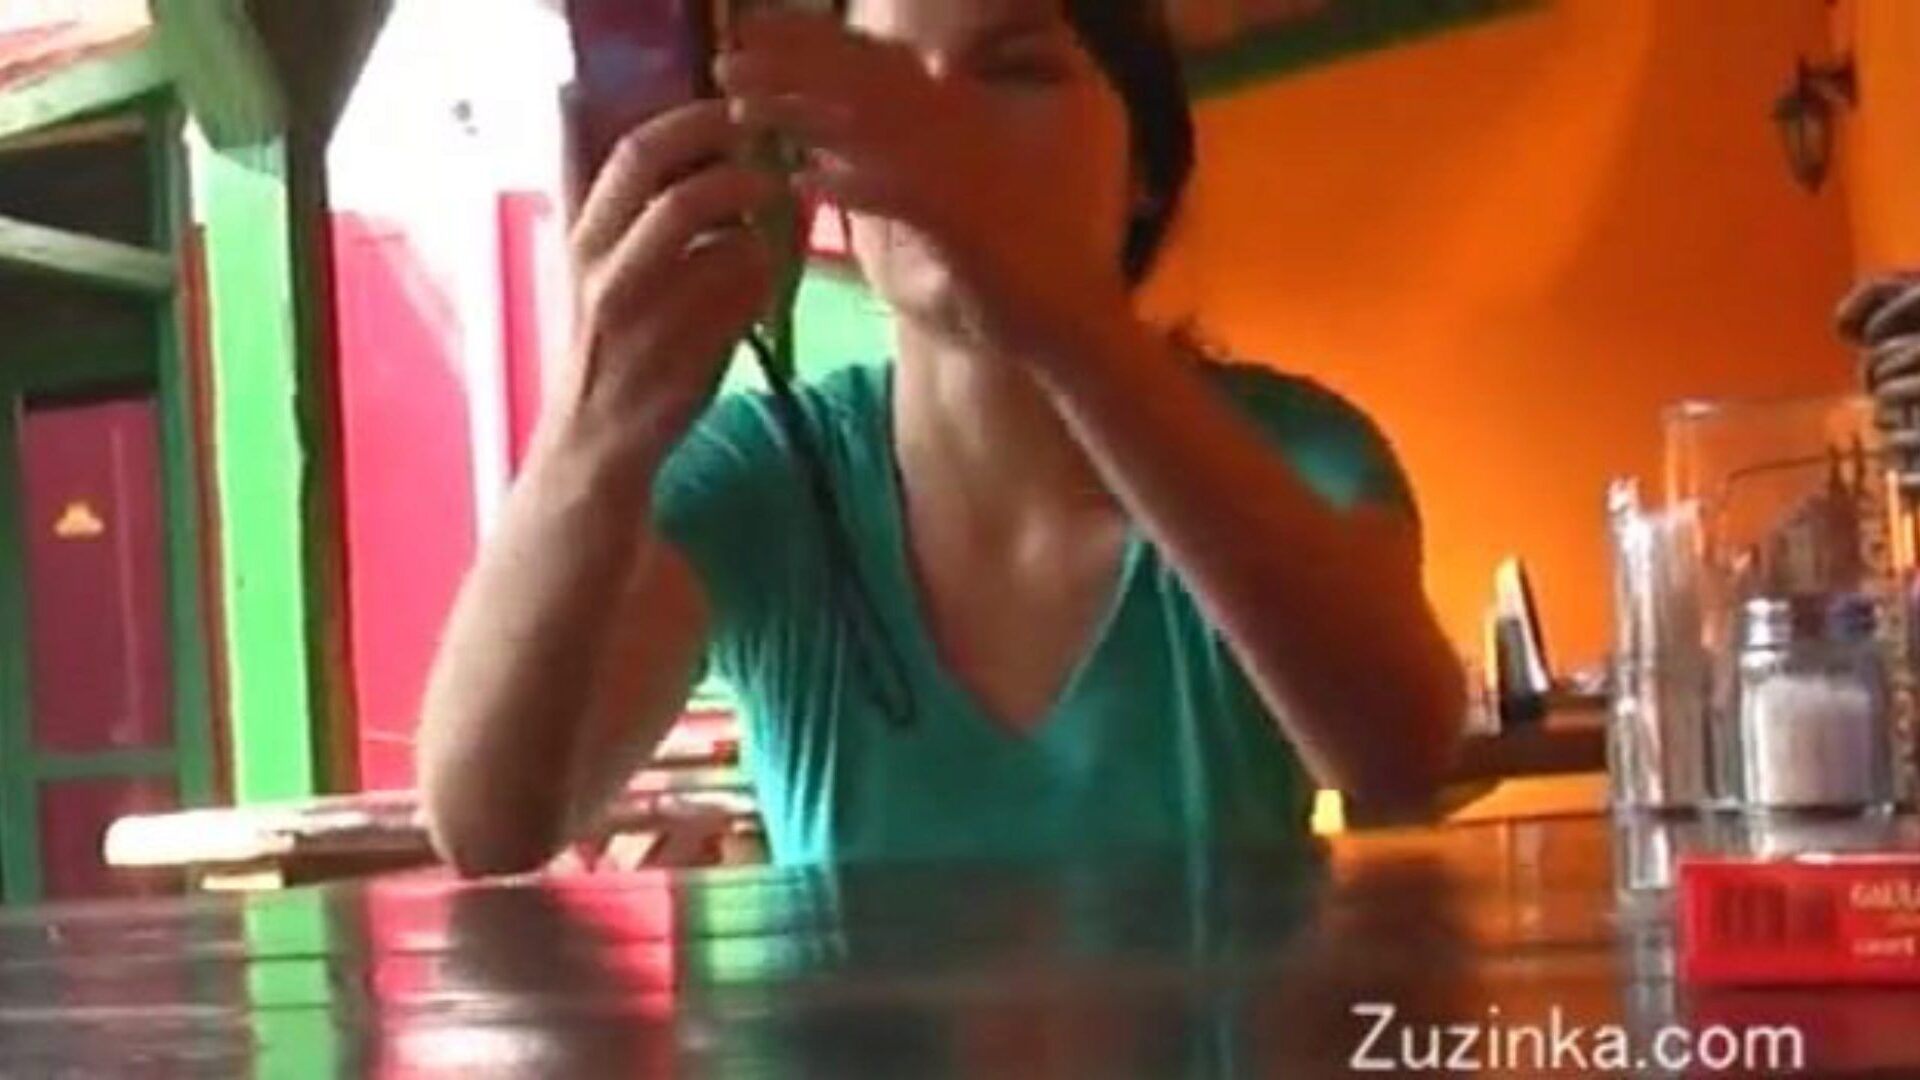 Czech cutie massages herself to large O in a crowded restaurant (real)